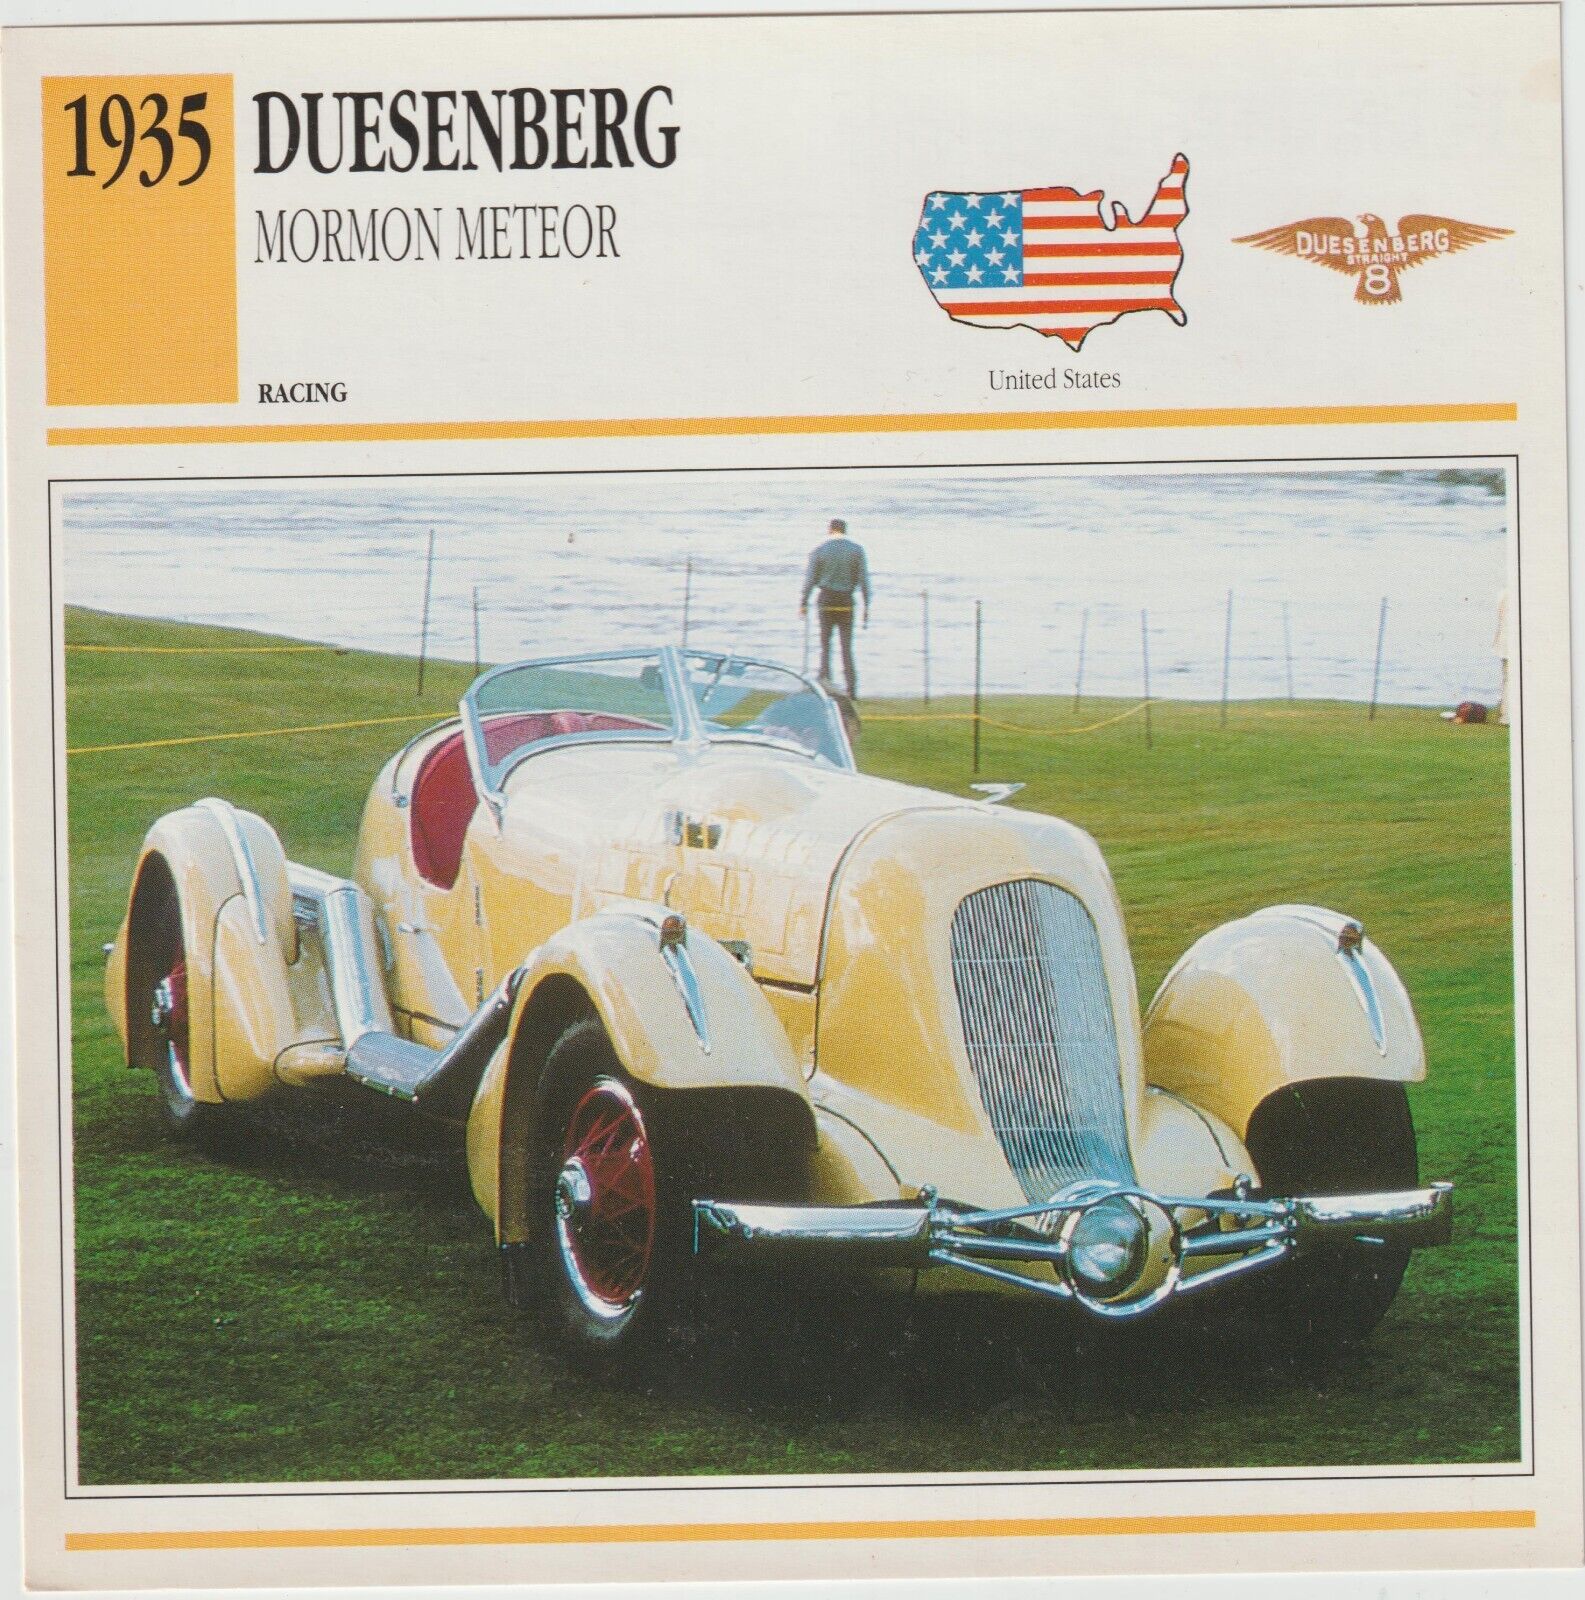 1935 DUESENBERG MORMON METEOR - Cars of the World Collector Card